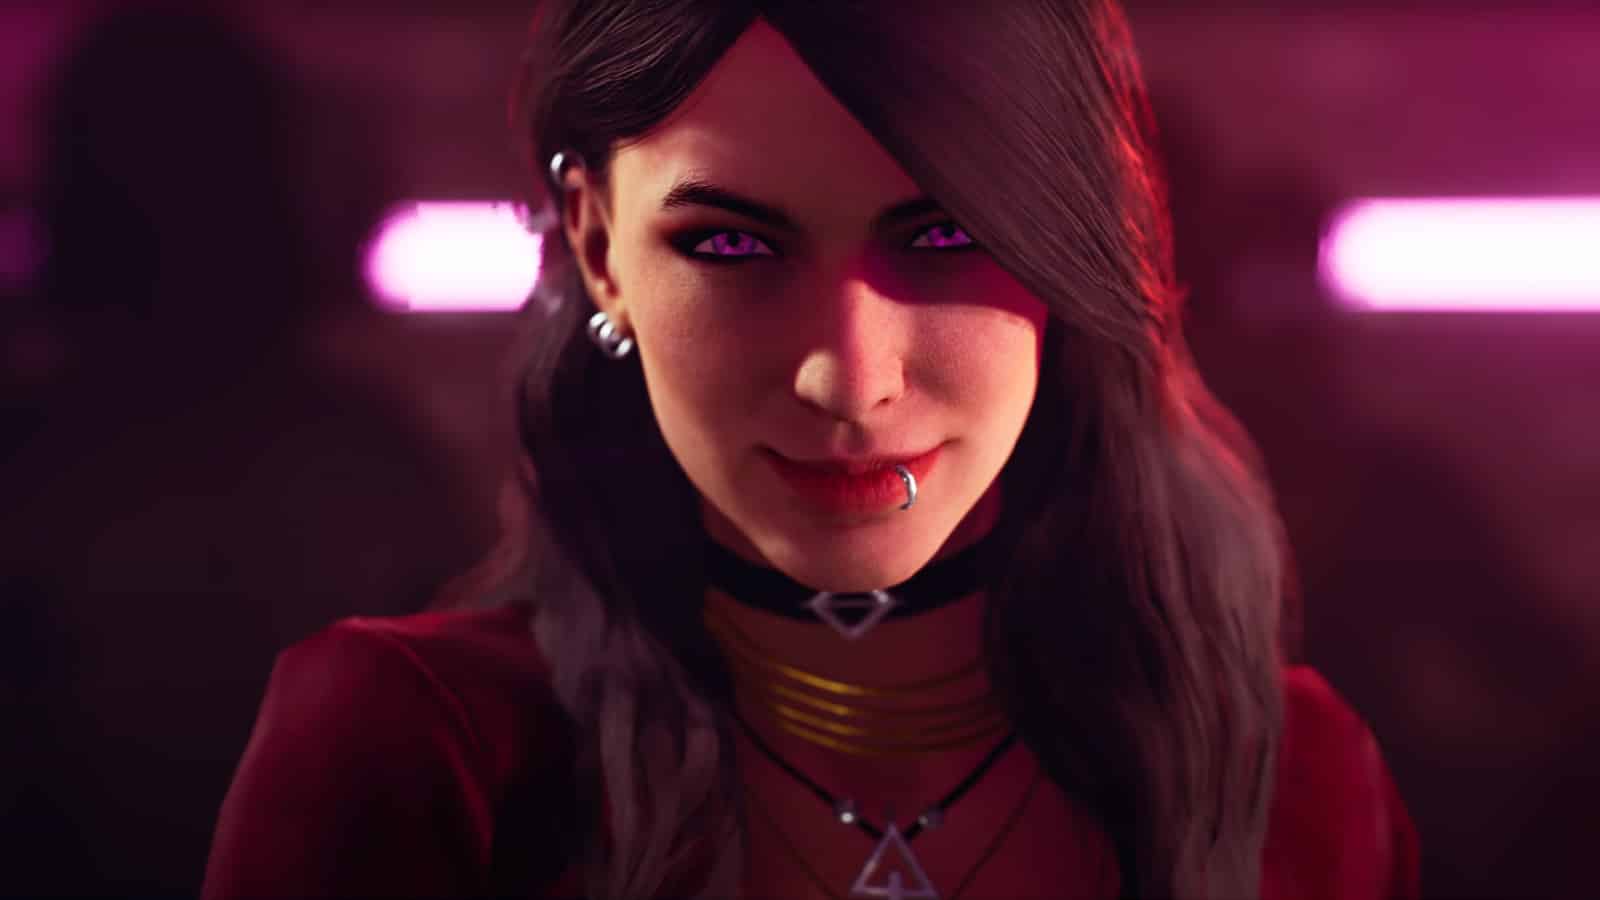 Paradox Interactive reveals the next playable clan in Vampire: The